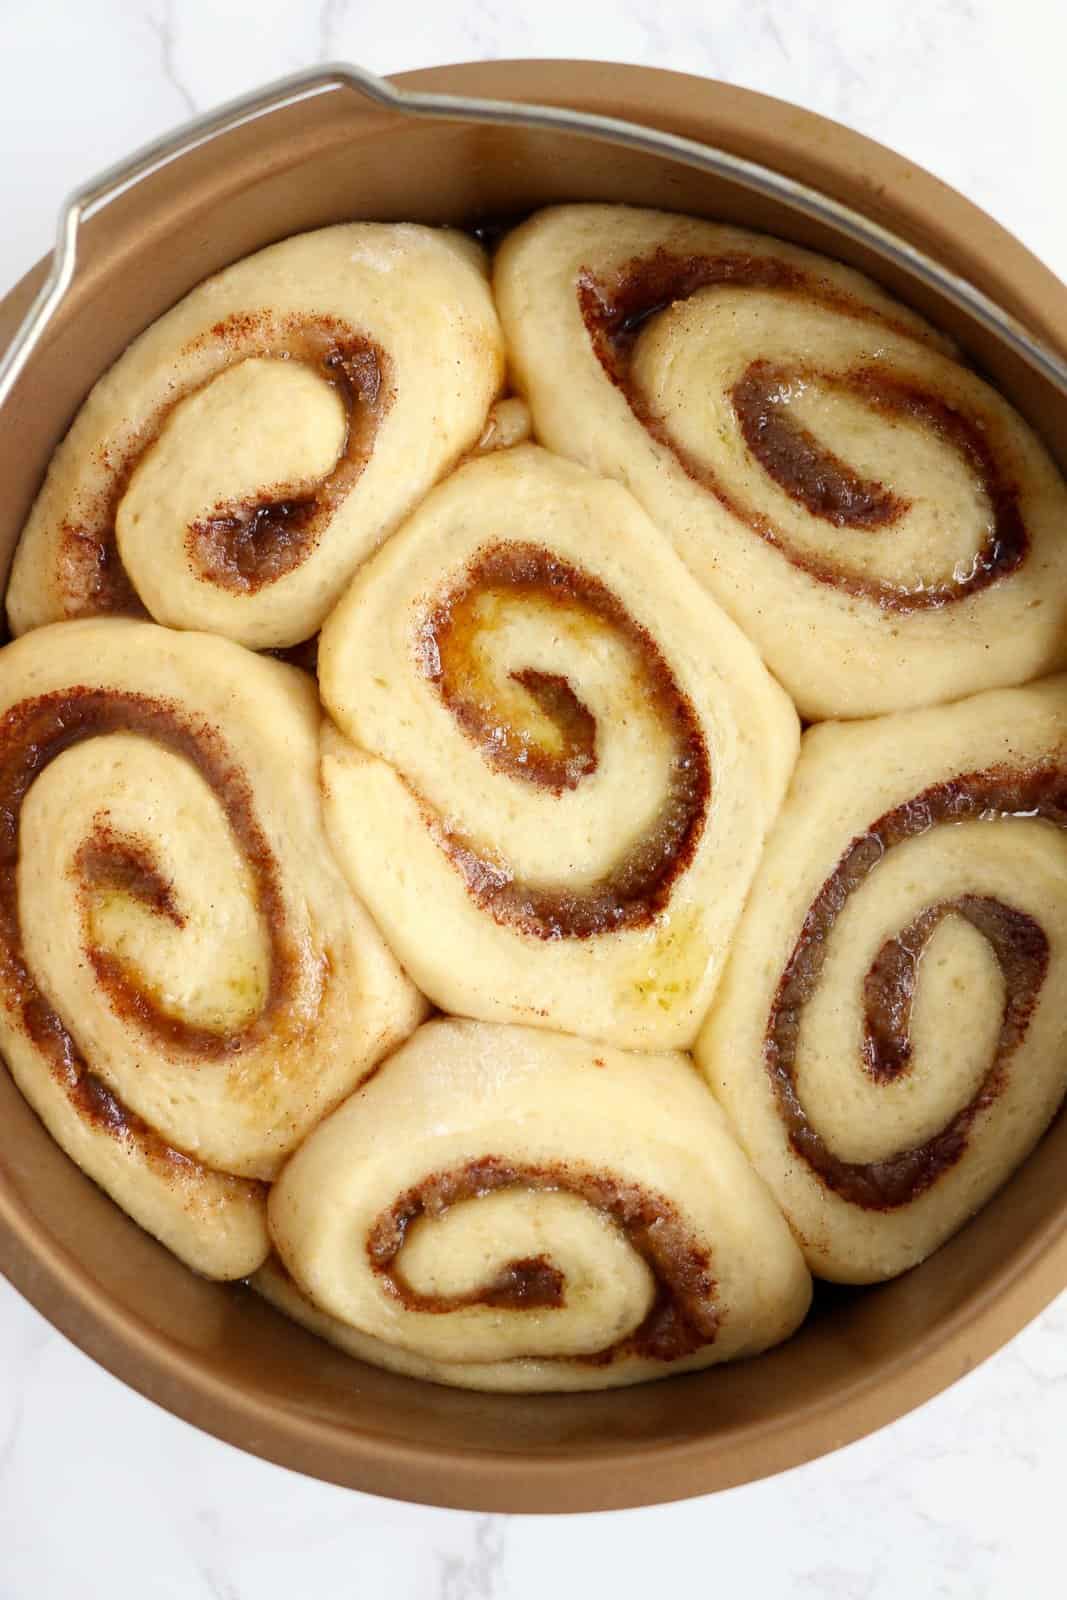 Cinnamon rolls after they have risen in prepared pan.